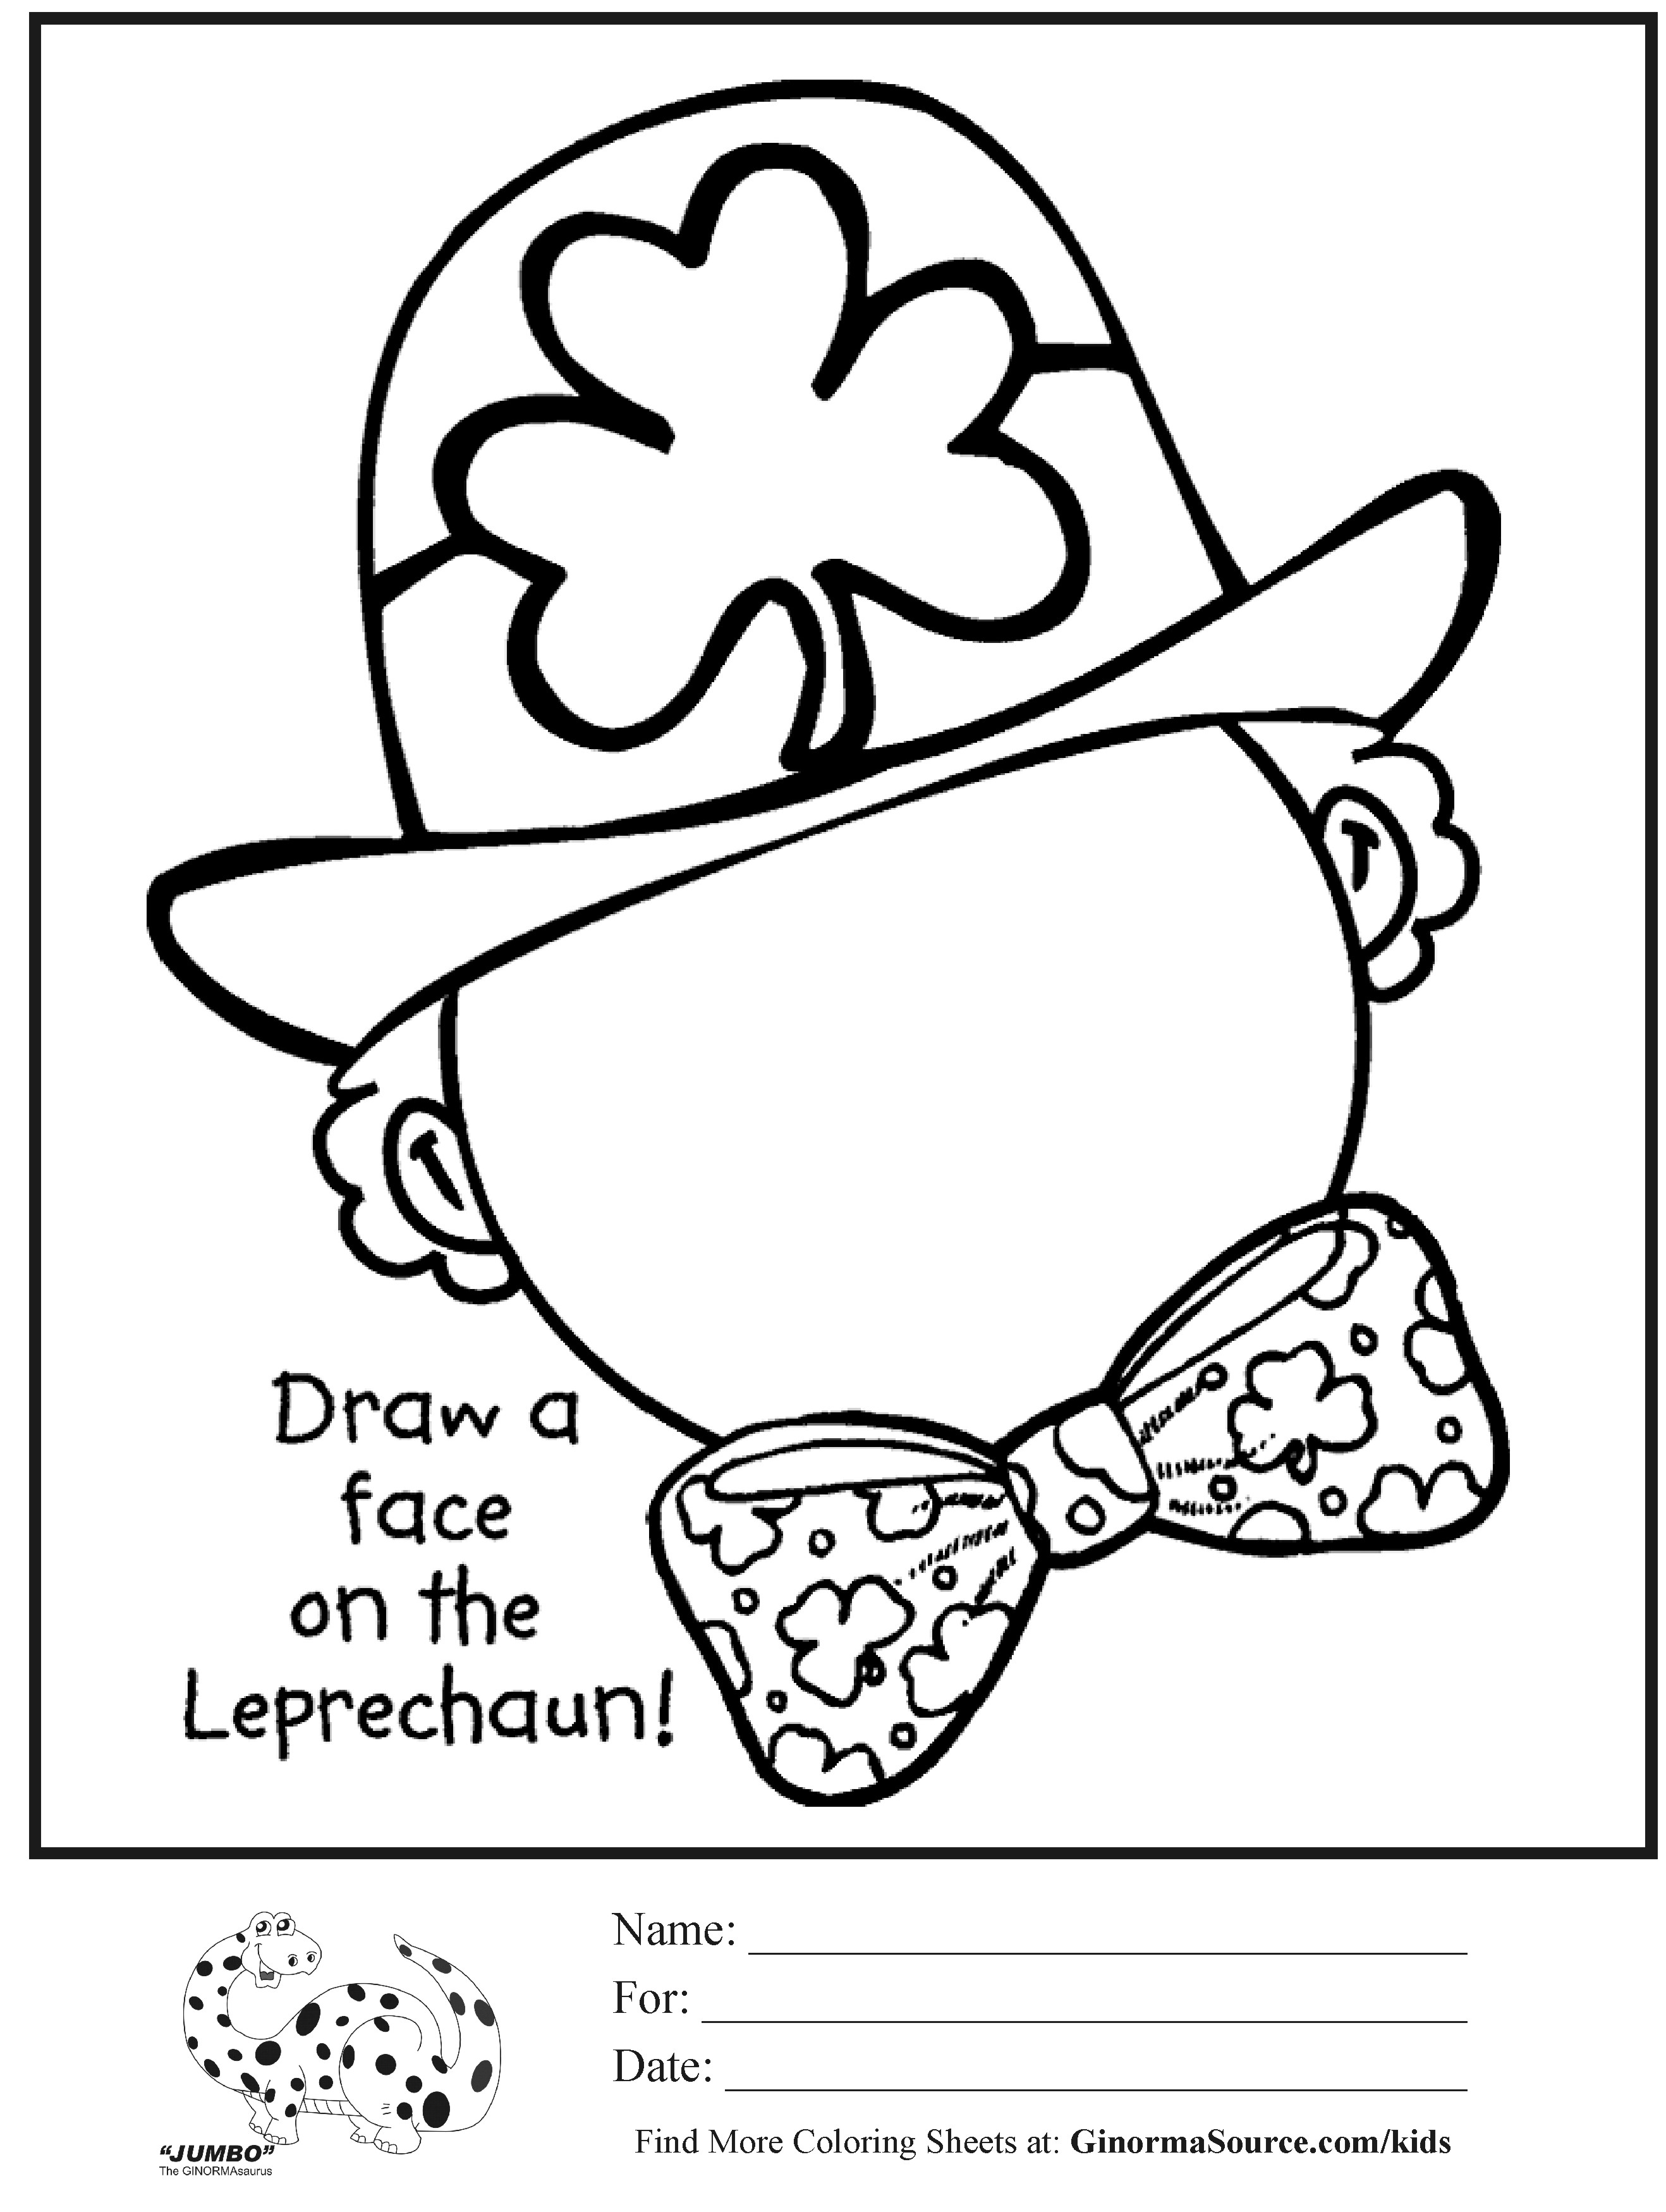 san-patrick-day-coloring-pages-st-patrick-s-day-coloring-pages